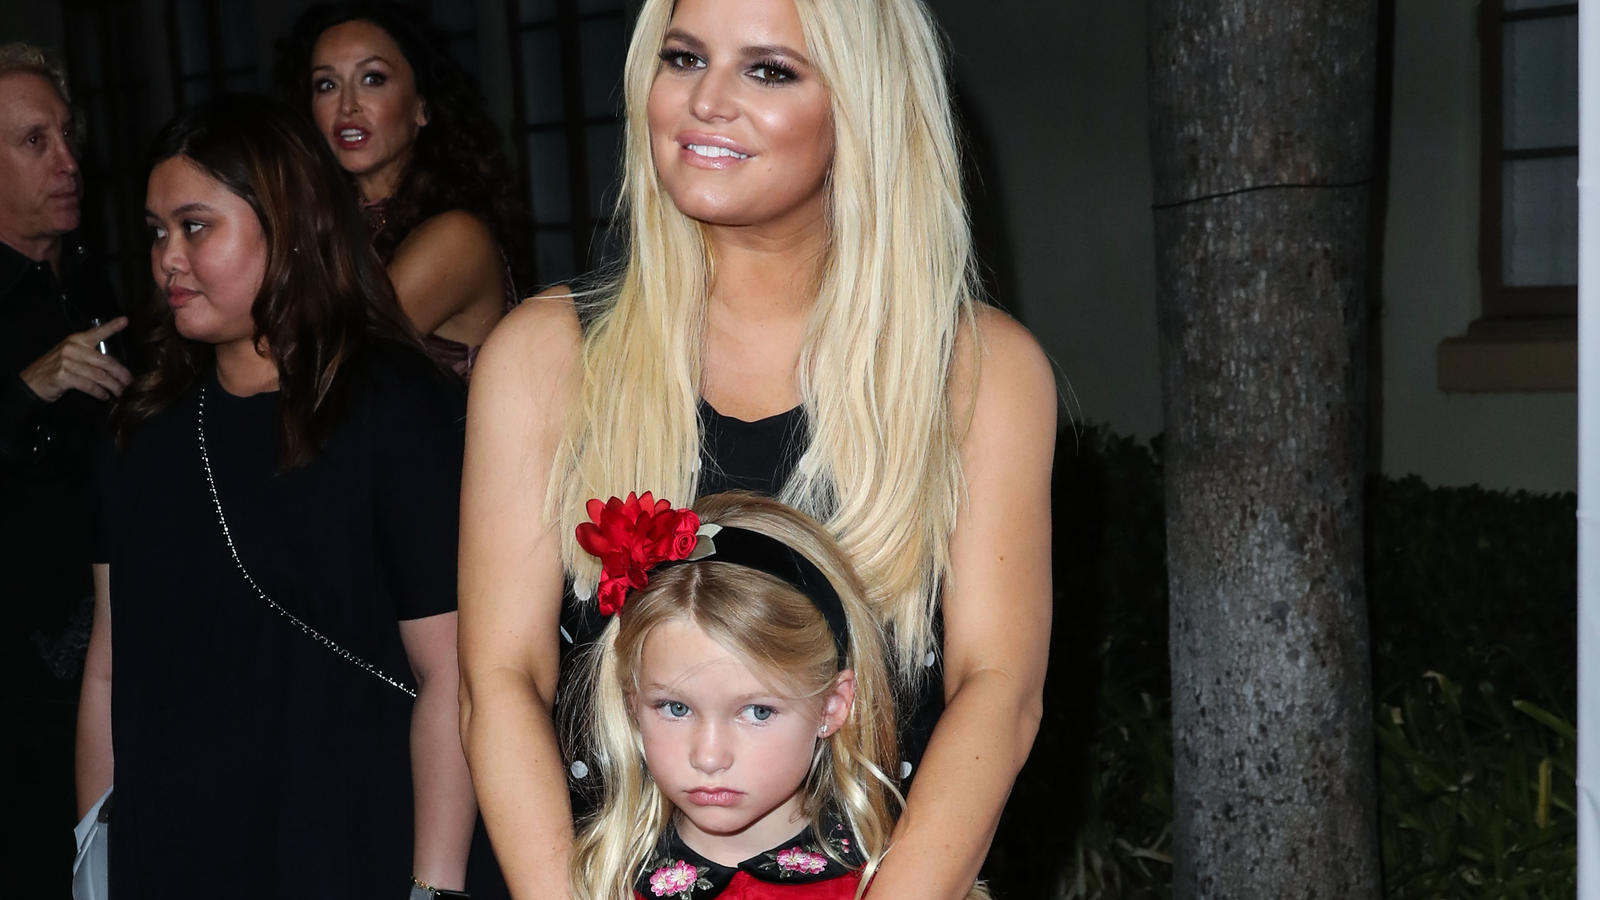 HOLLYWOOD, LOS ANGELES, CA, USA - OCTOBER 24: Singer/actress Jessica Simpson and daughter Maxwell Johnson arrive at the 2017 Princess Grace Awards Gala Kickoff Event held at Paramount Studios on October 24, 2017 in Hollywood, Los Angeles, California,